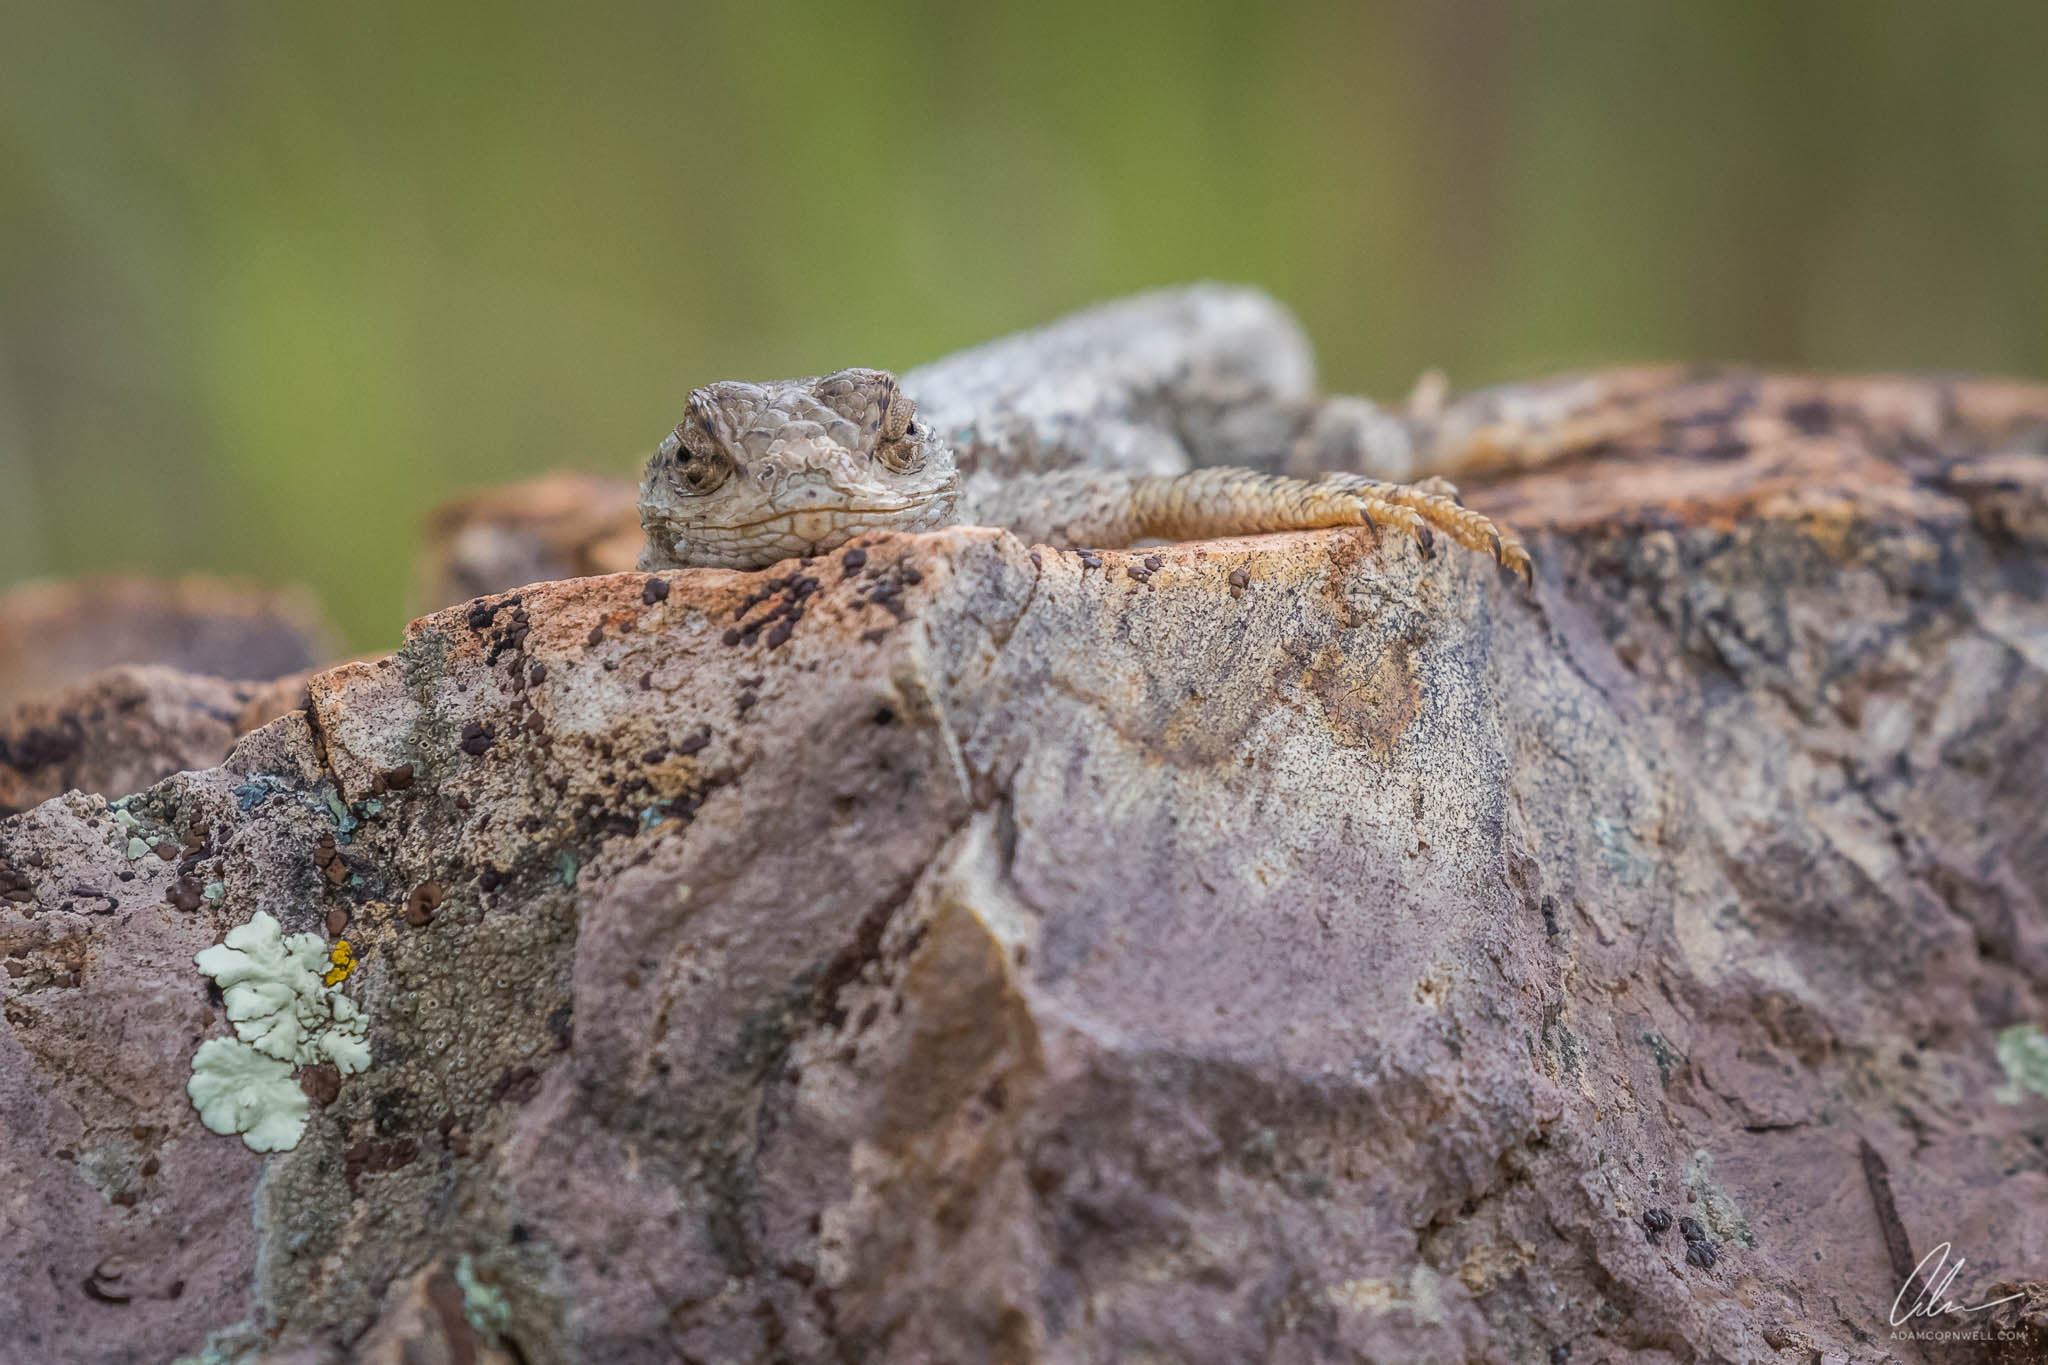   Western Fence Lizard  Painted Hills, OR #20150522_0153 